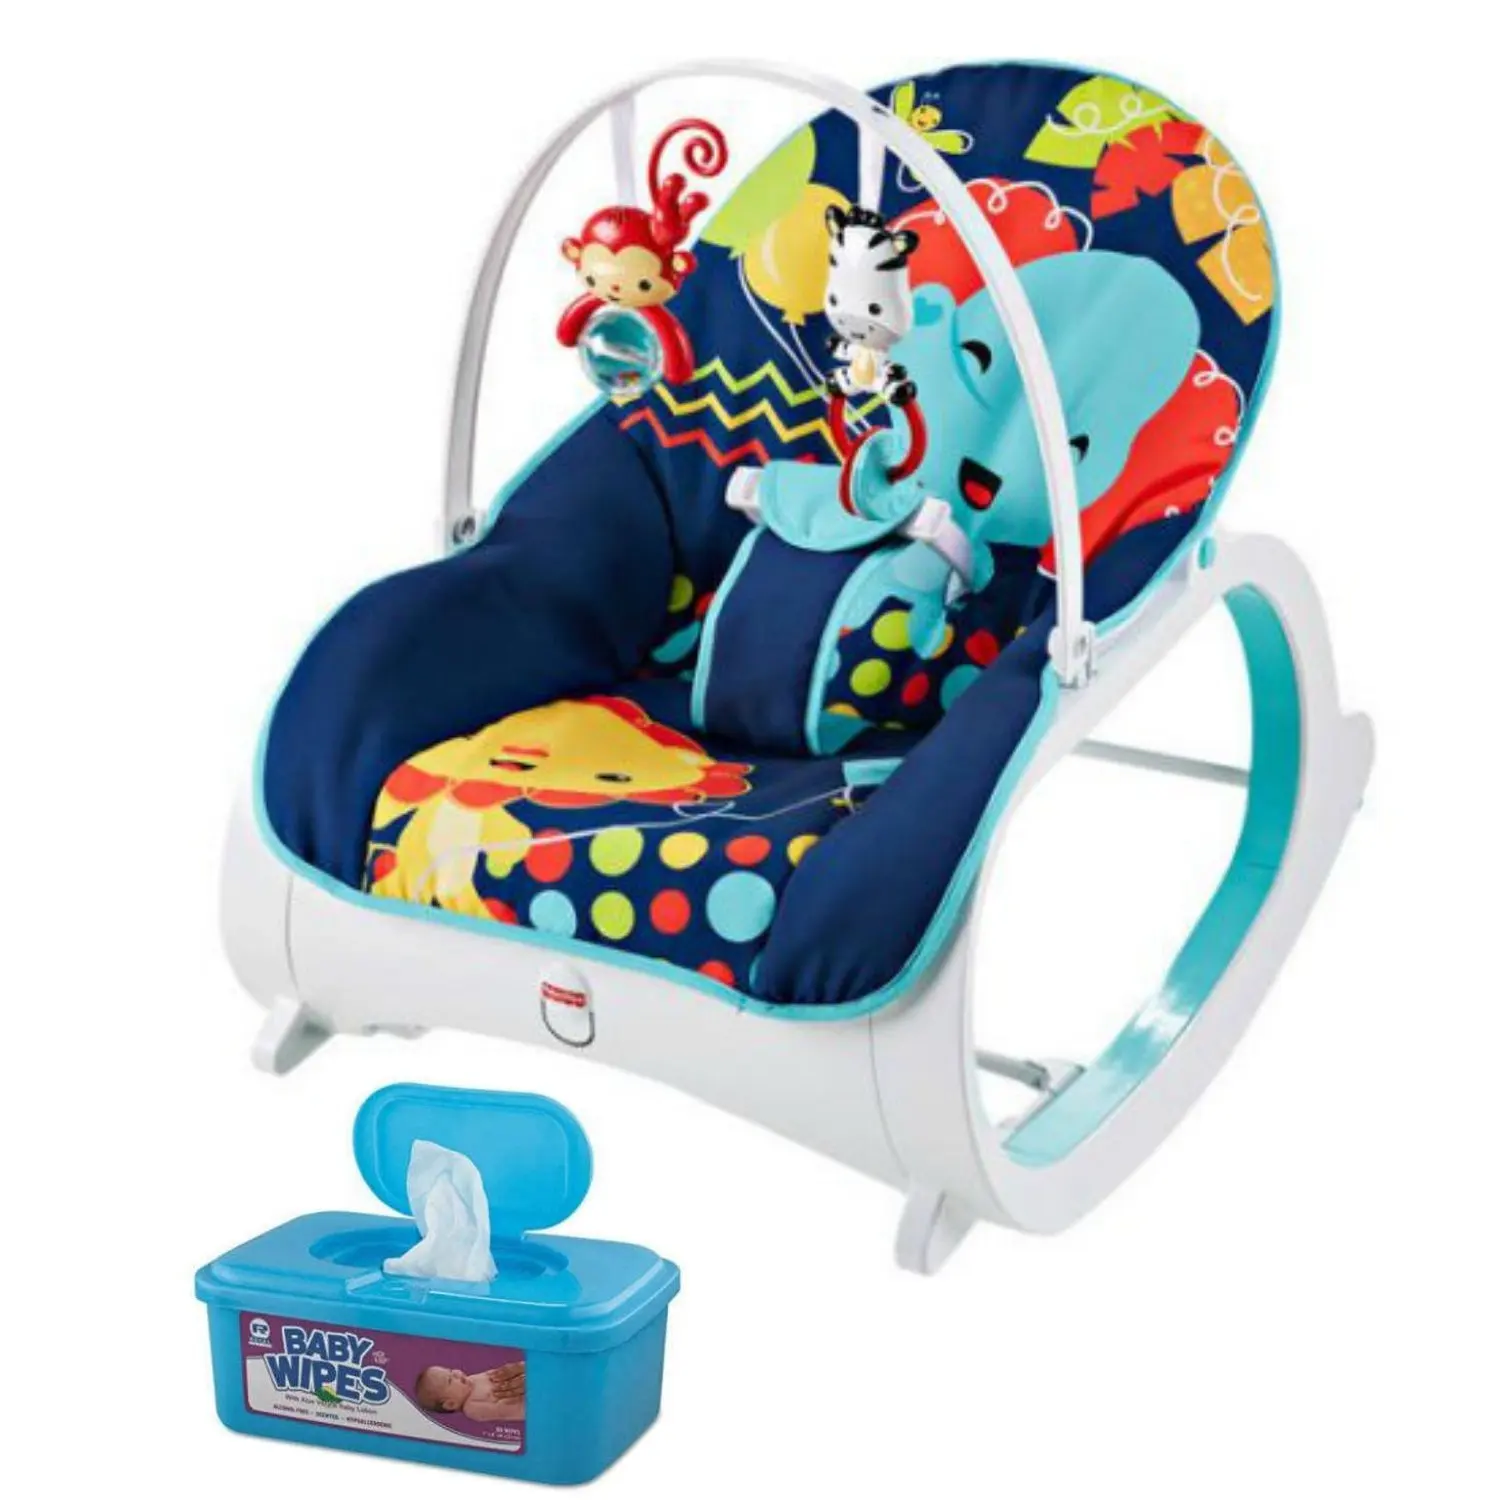 Cheap Infant To Toddler Rocker Chair, find Infant To Toddler Rocker